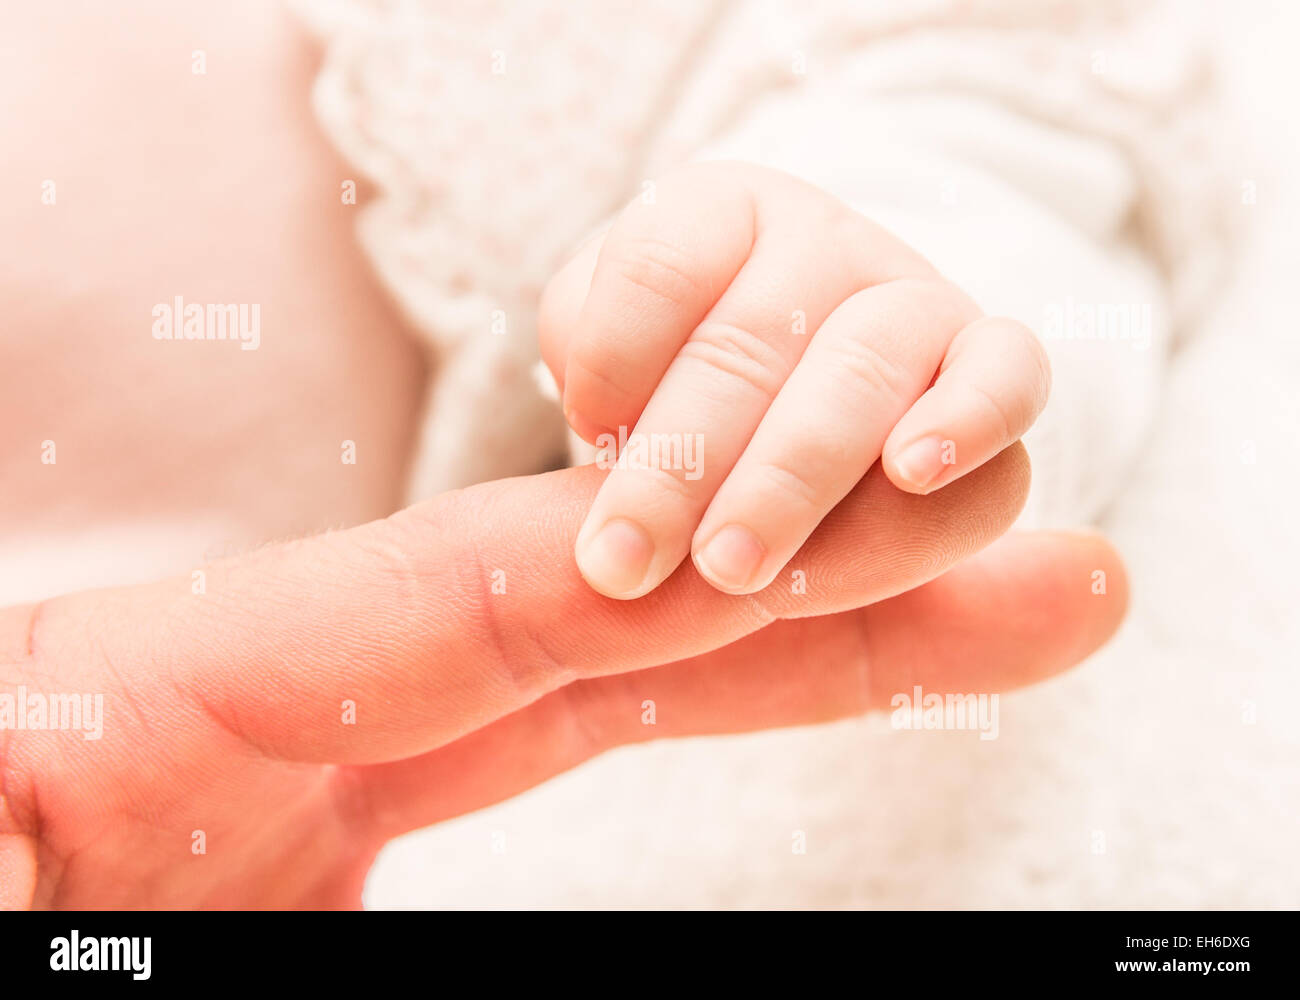 Hand of the newborn child in the hands of the parent Stock Photo